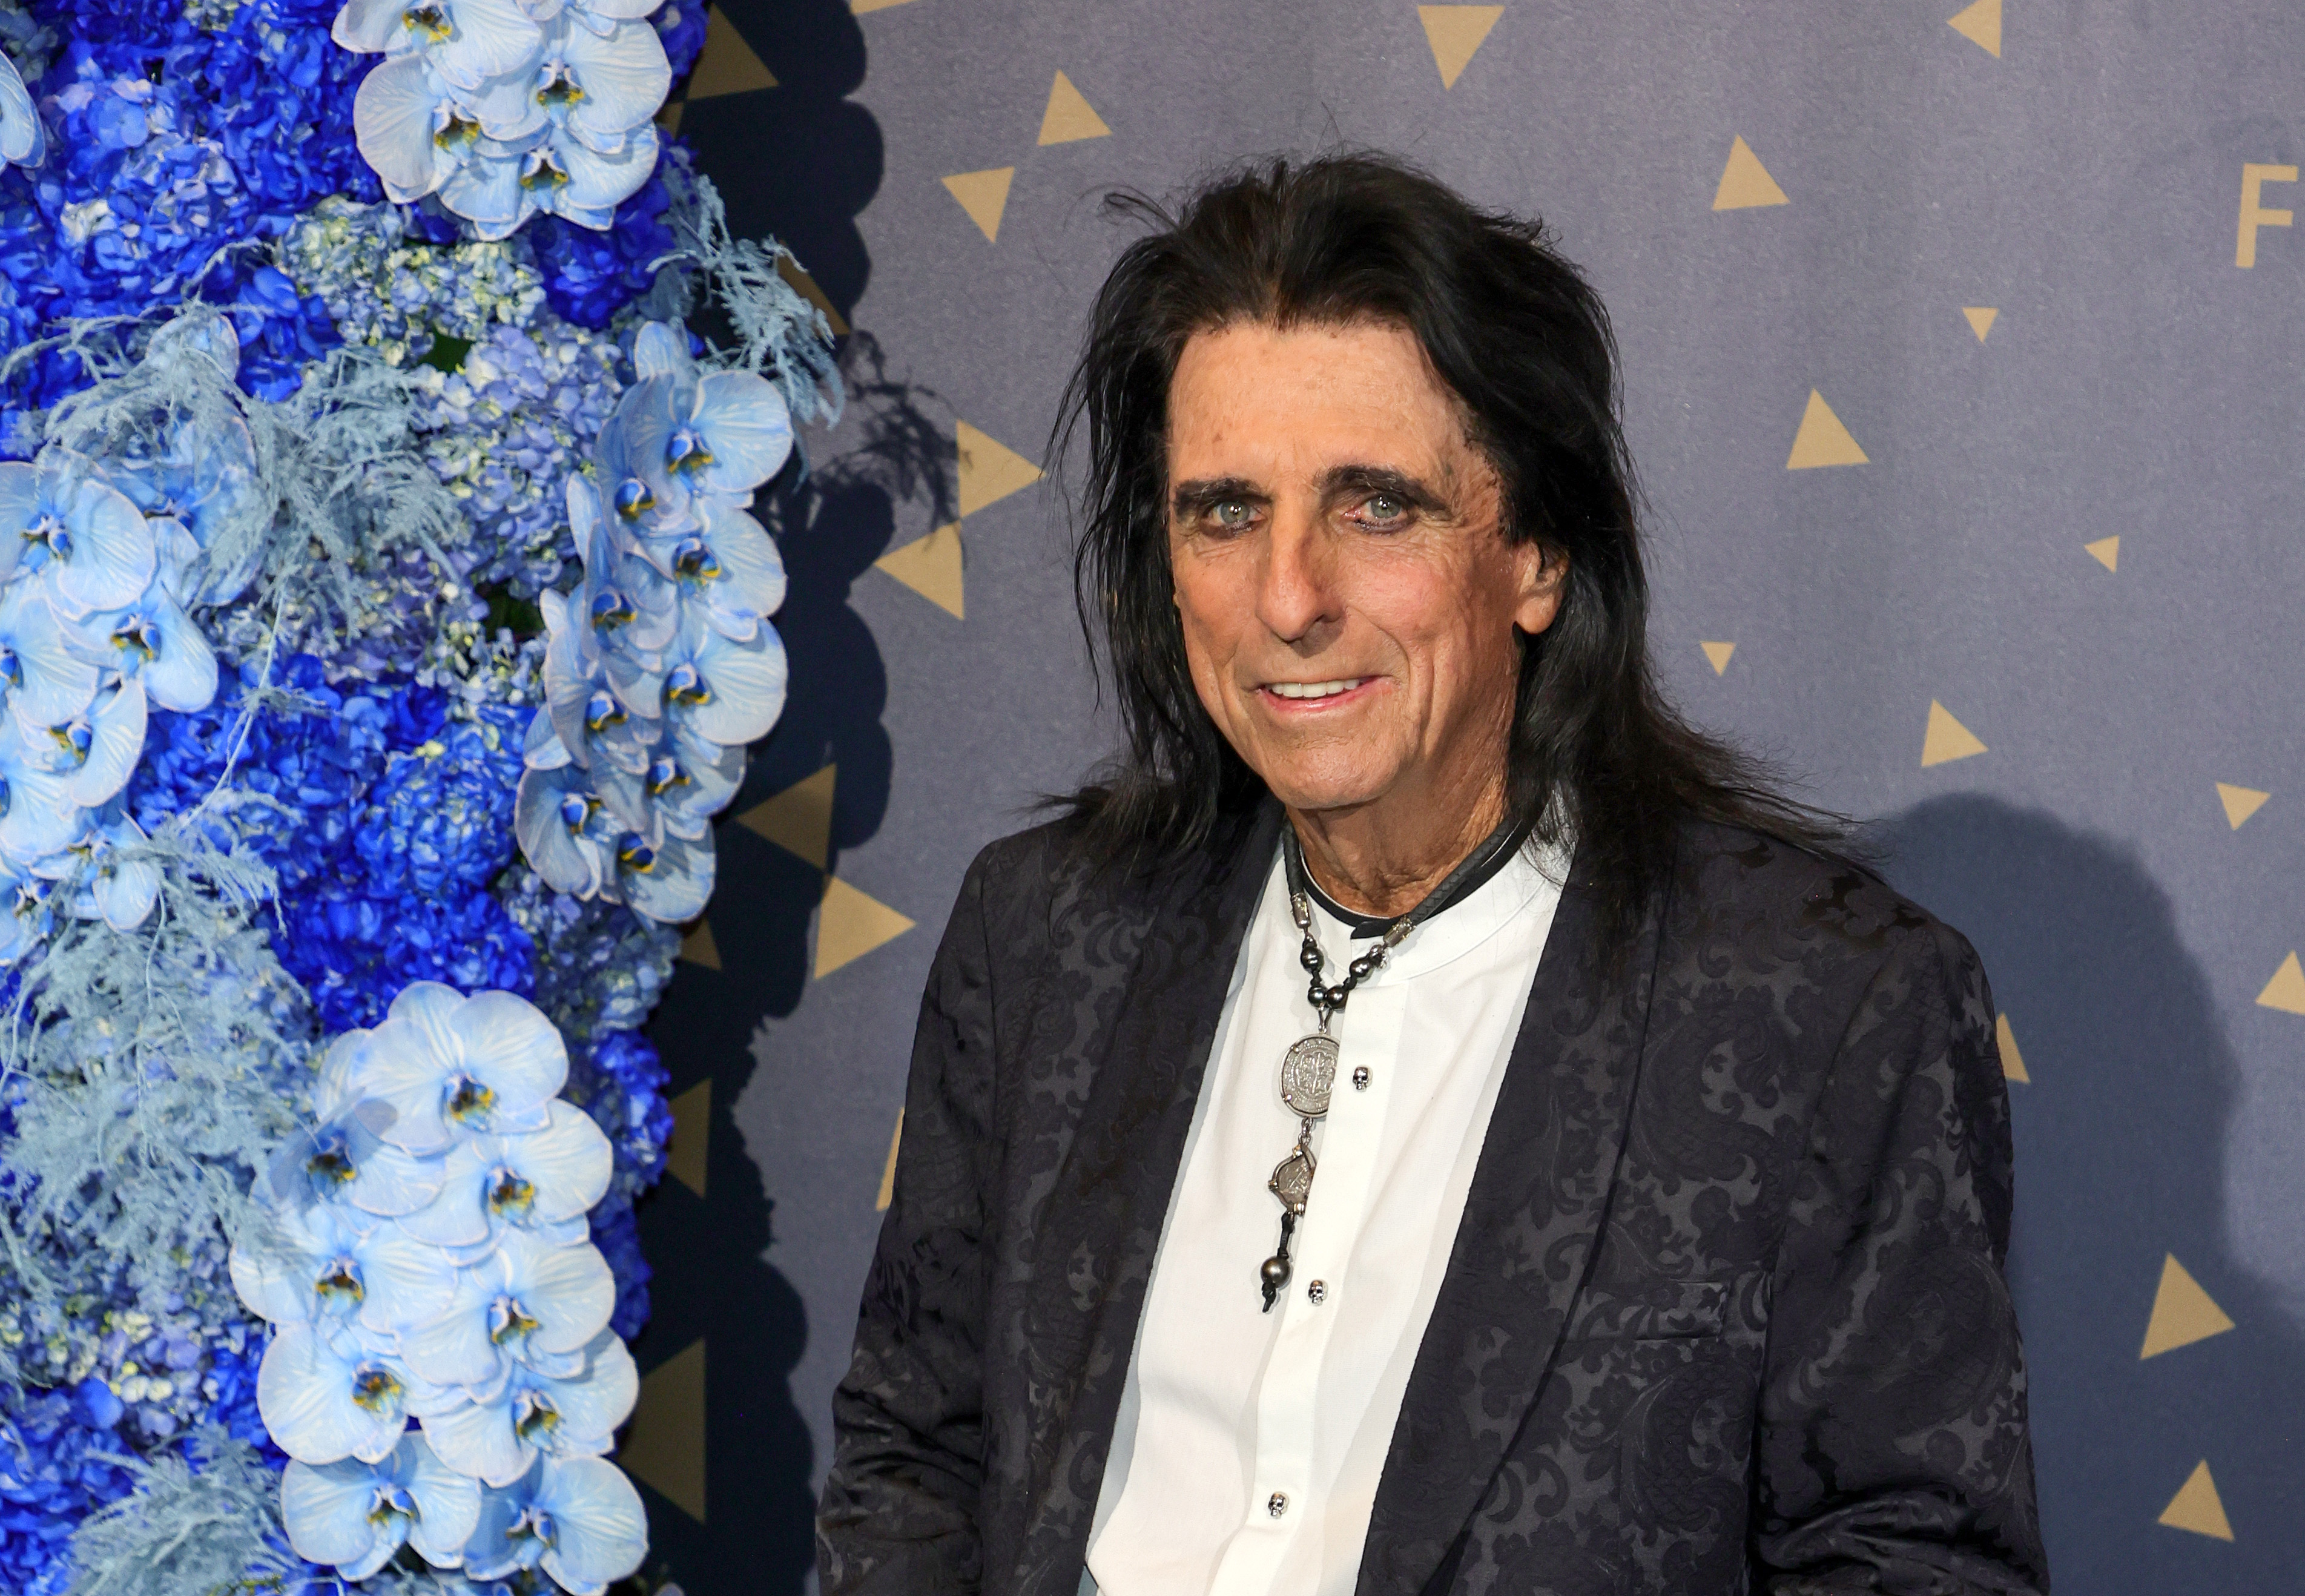 Alice Cooper is at the grand opening of Fontainebleau Las Vegas in Las Vegas, Nevada